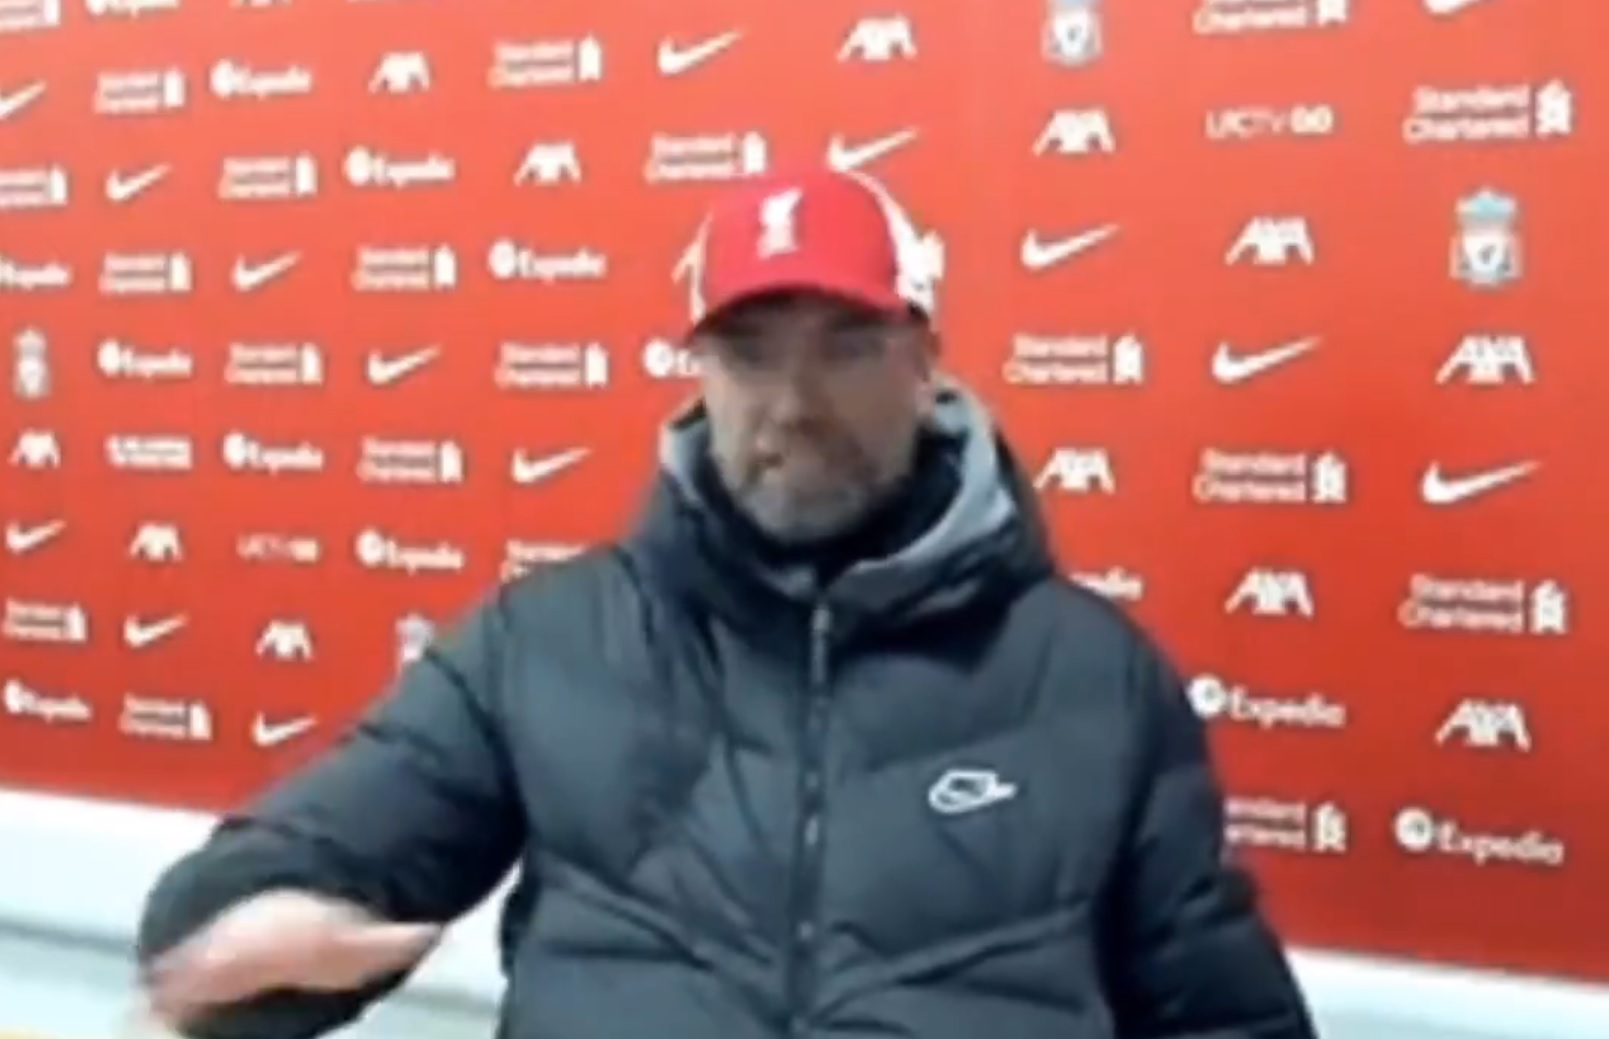 (Video) ‘It’s not rocket science’ – Klopp says Liverpool need to be more cutthroat in decisive moments